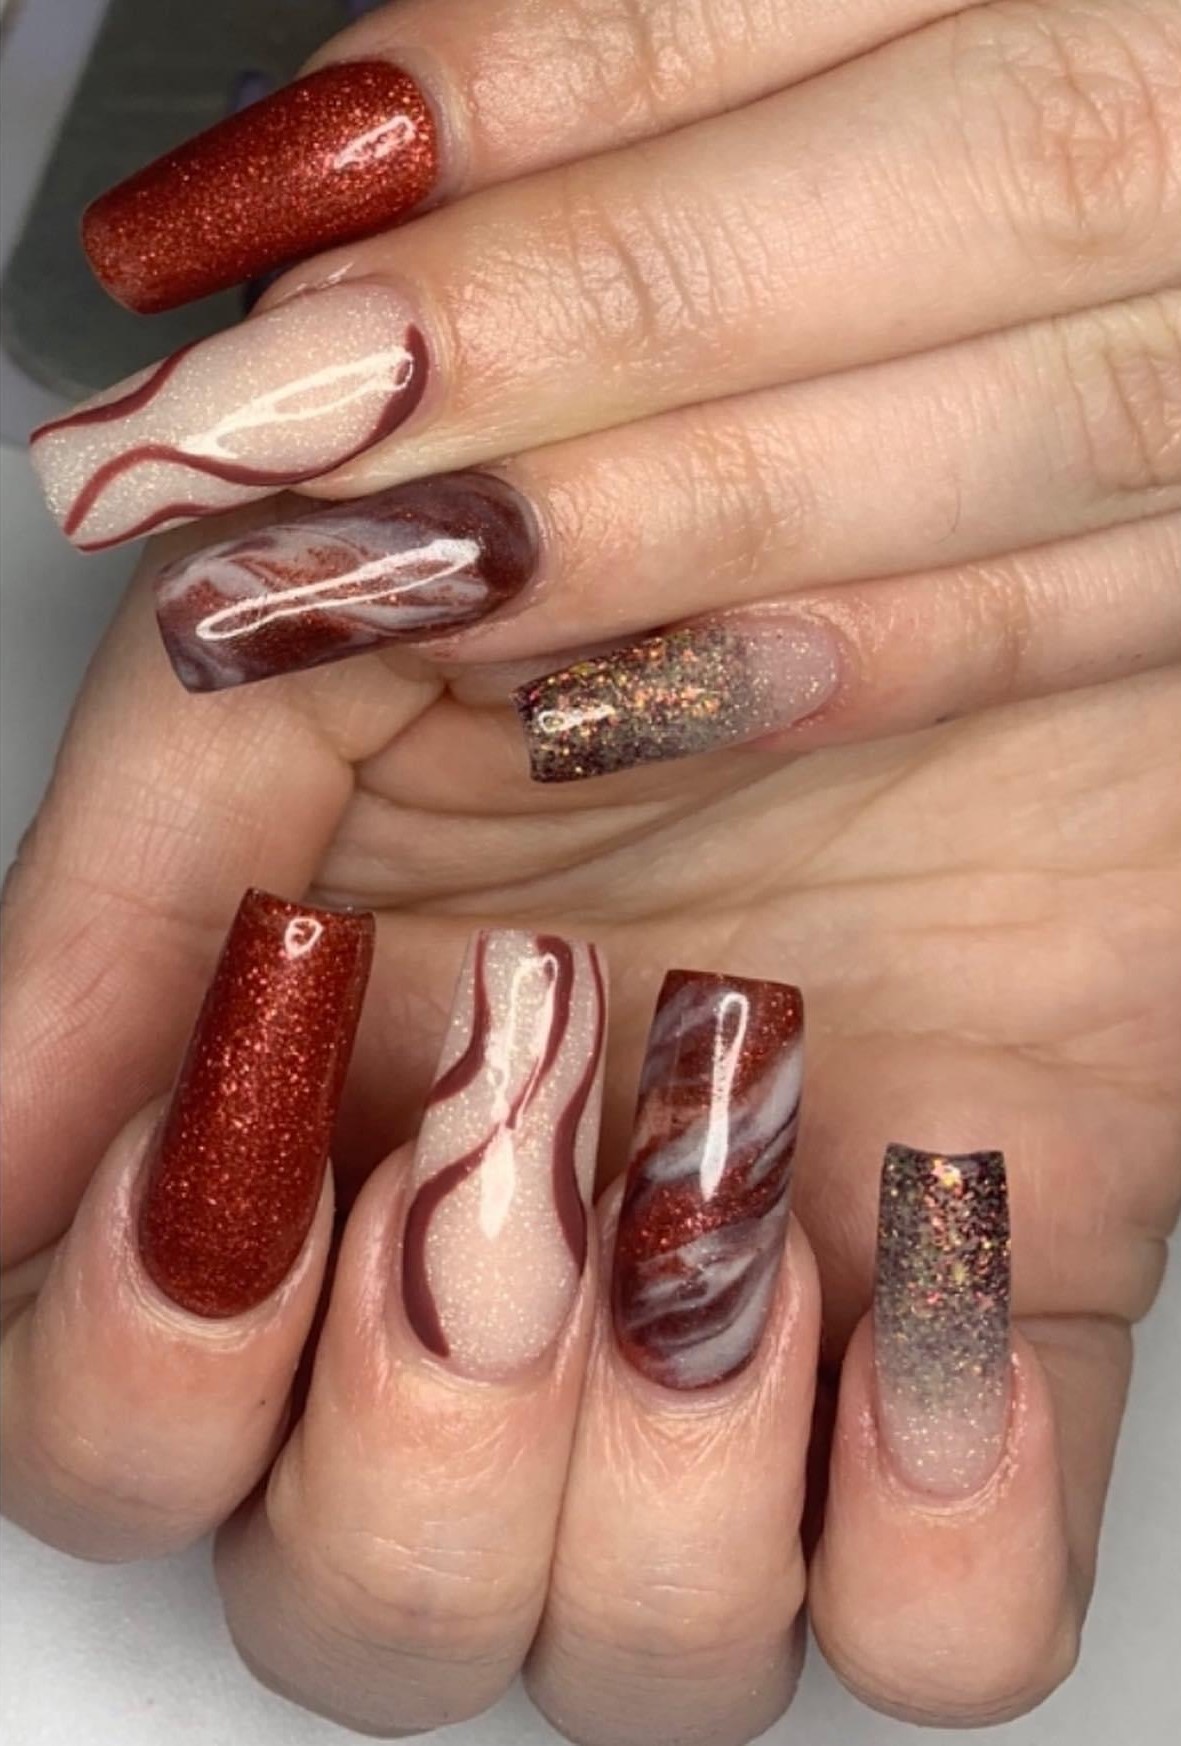 Siobhan loves creating unusual nails for her clients